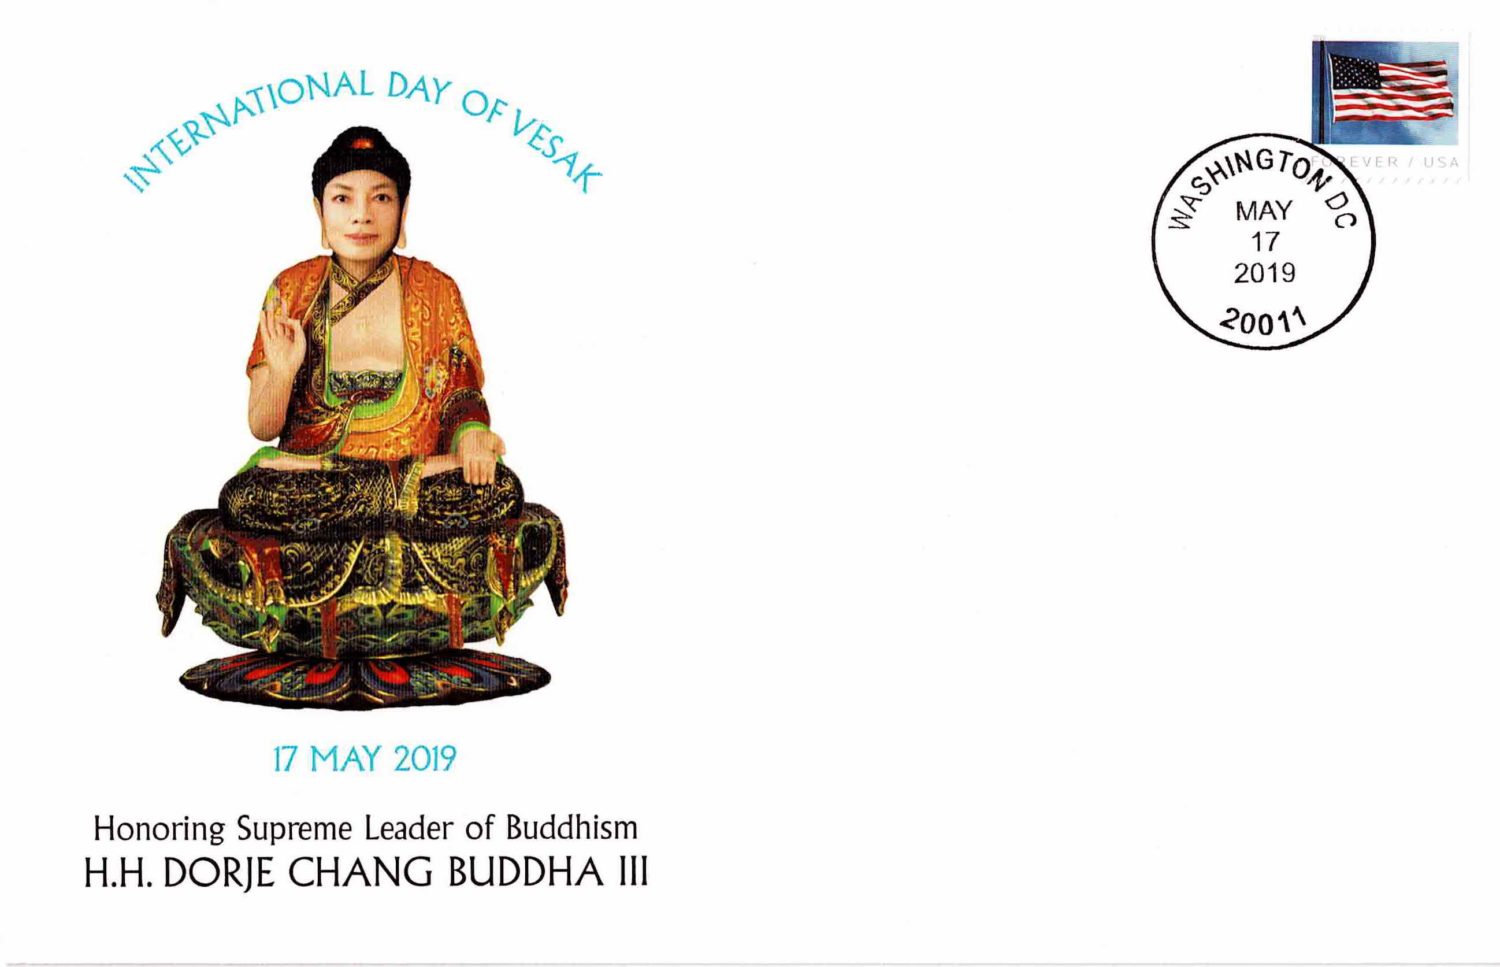 Photo 3 First Day Cover of H.H. Dorje Chang Buddha III Sitting on a Lotus Platform